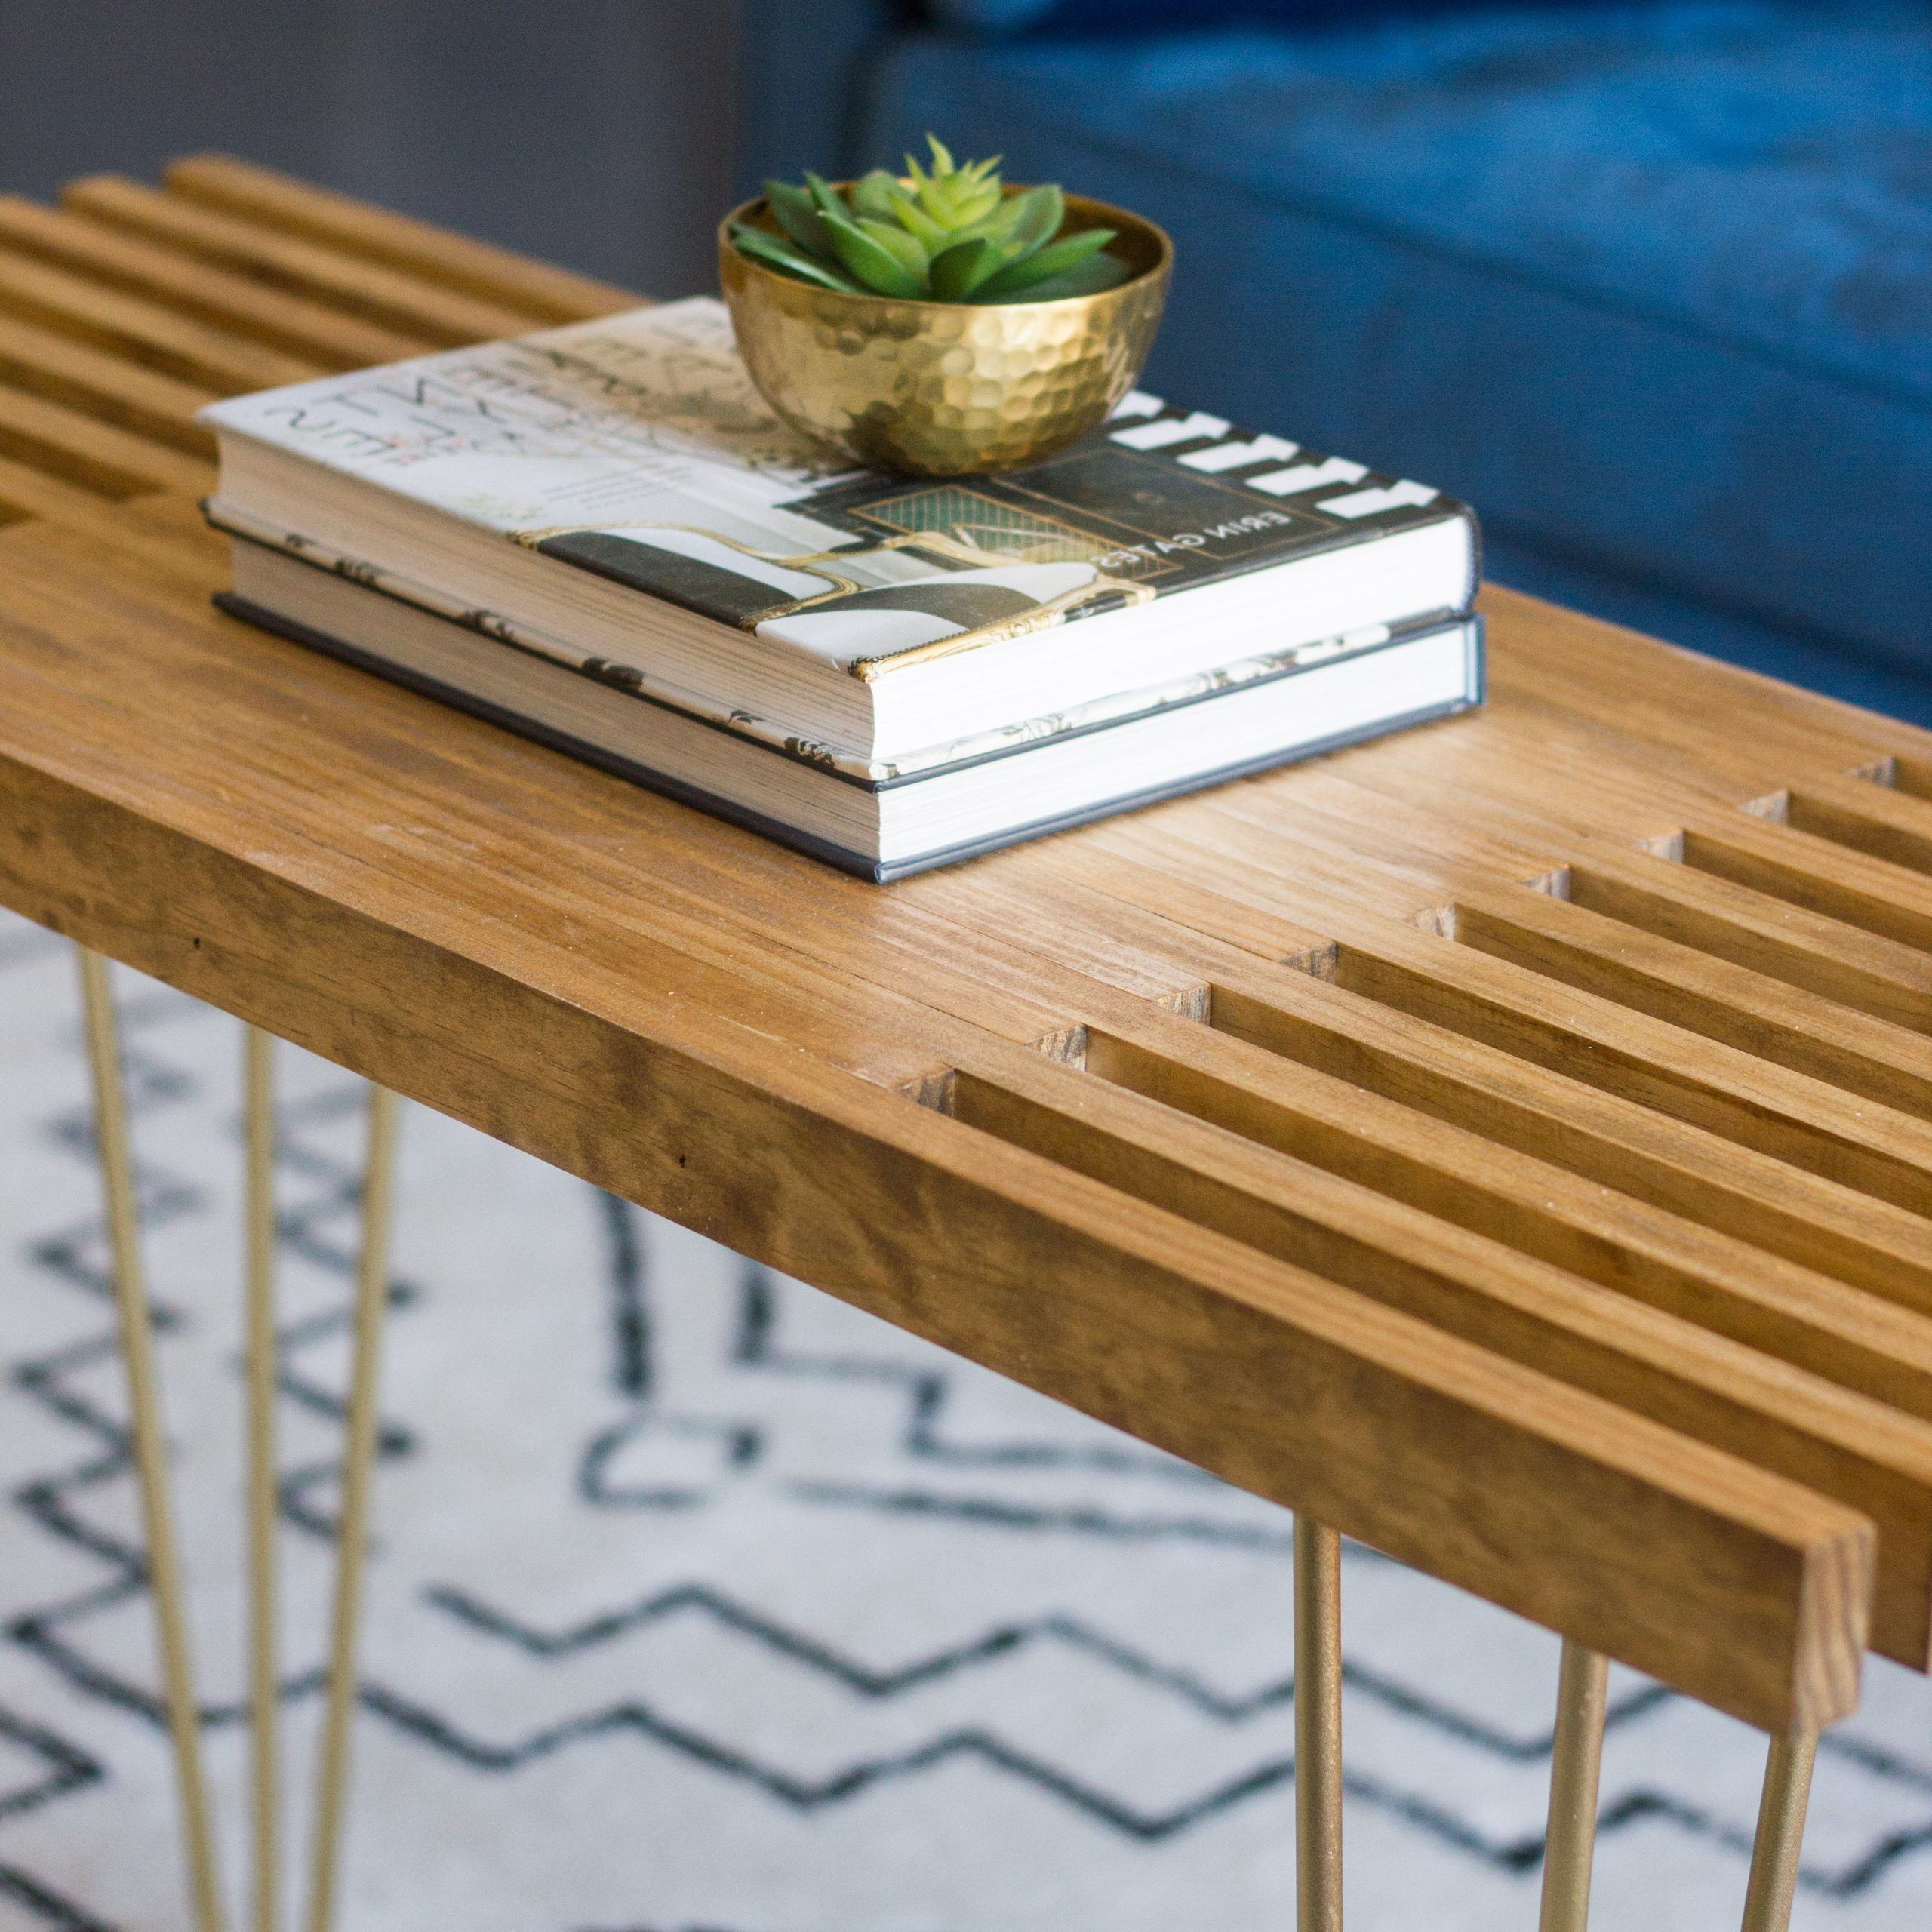 Diy Slatted Coffee Table With Hairpin Legs – Erin Spain Within Most Current Slat Coffee Tables (View 1 of 20)